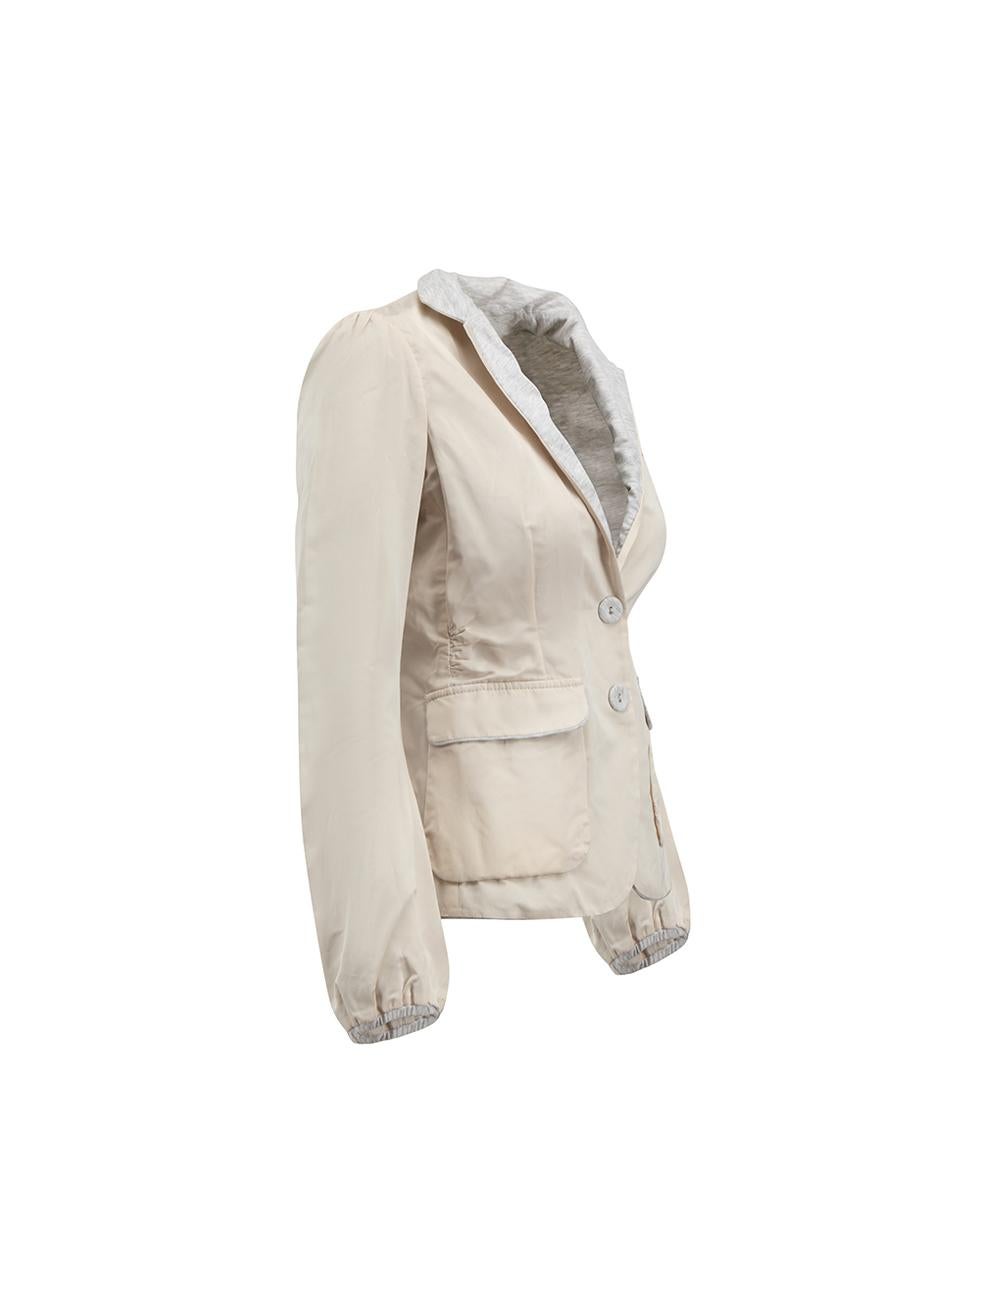 CONDITION is Very good. Hardly any visible wear to jacket is evident on this used Brunello Cucinelli designer resale item.



Details


Ecru

Polyester

Fitted blazer

Waterproof

Front snap buttons closure

Elasticated cuffs

2x Front side pockets